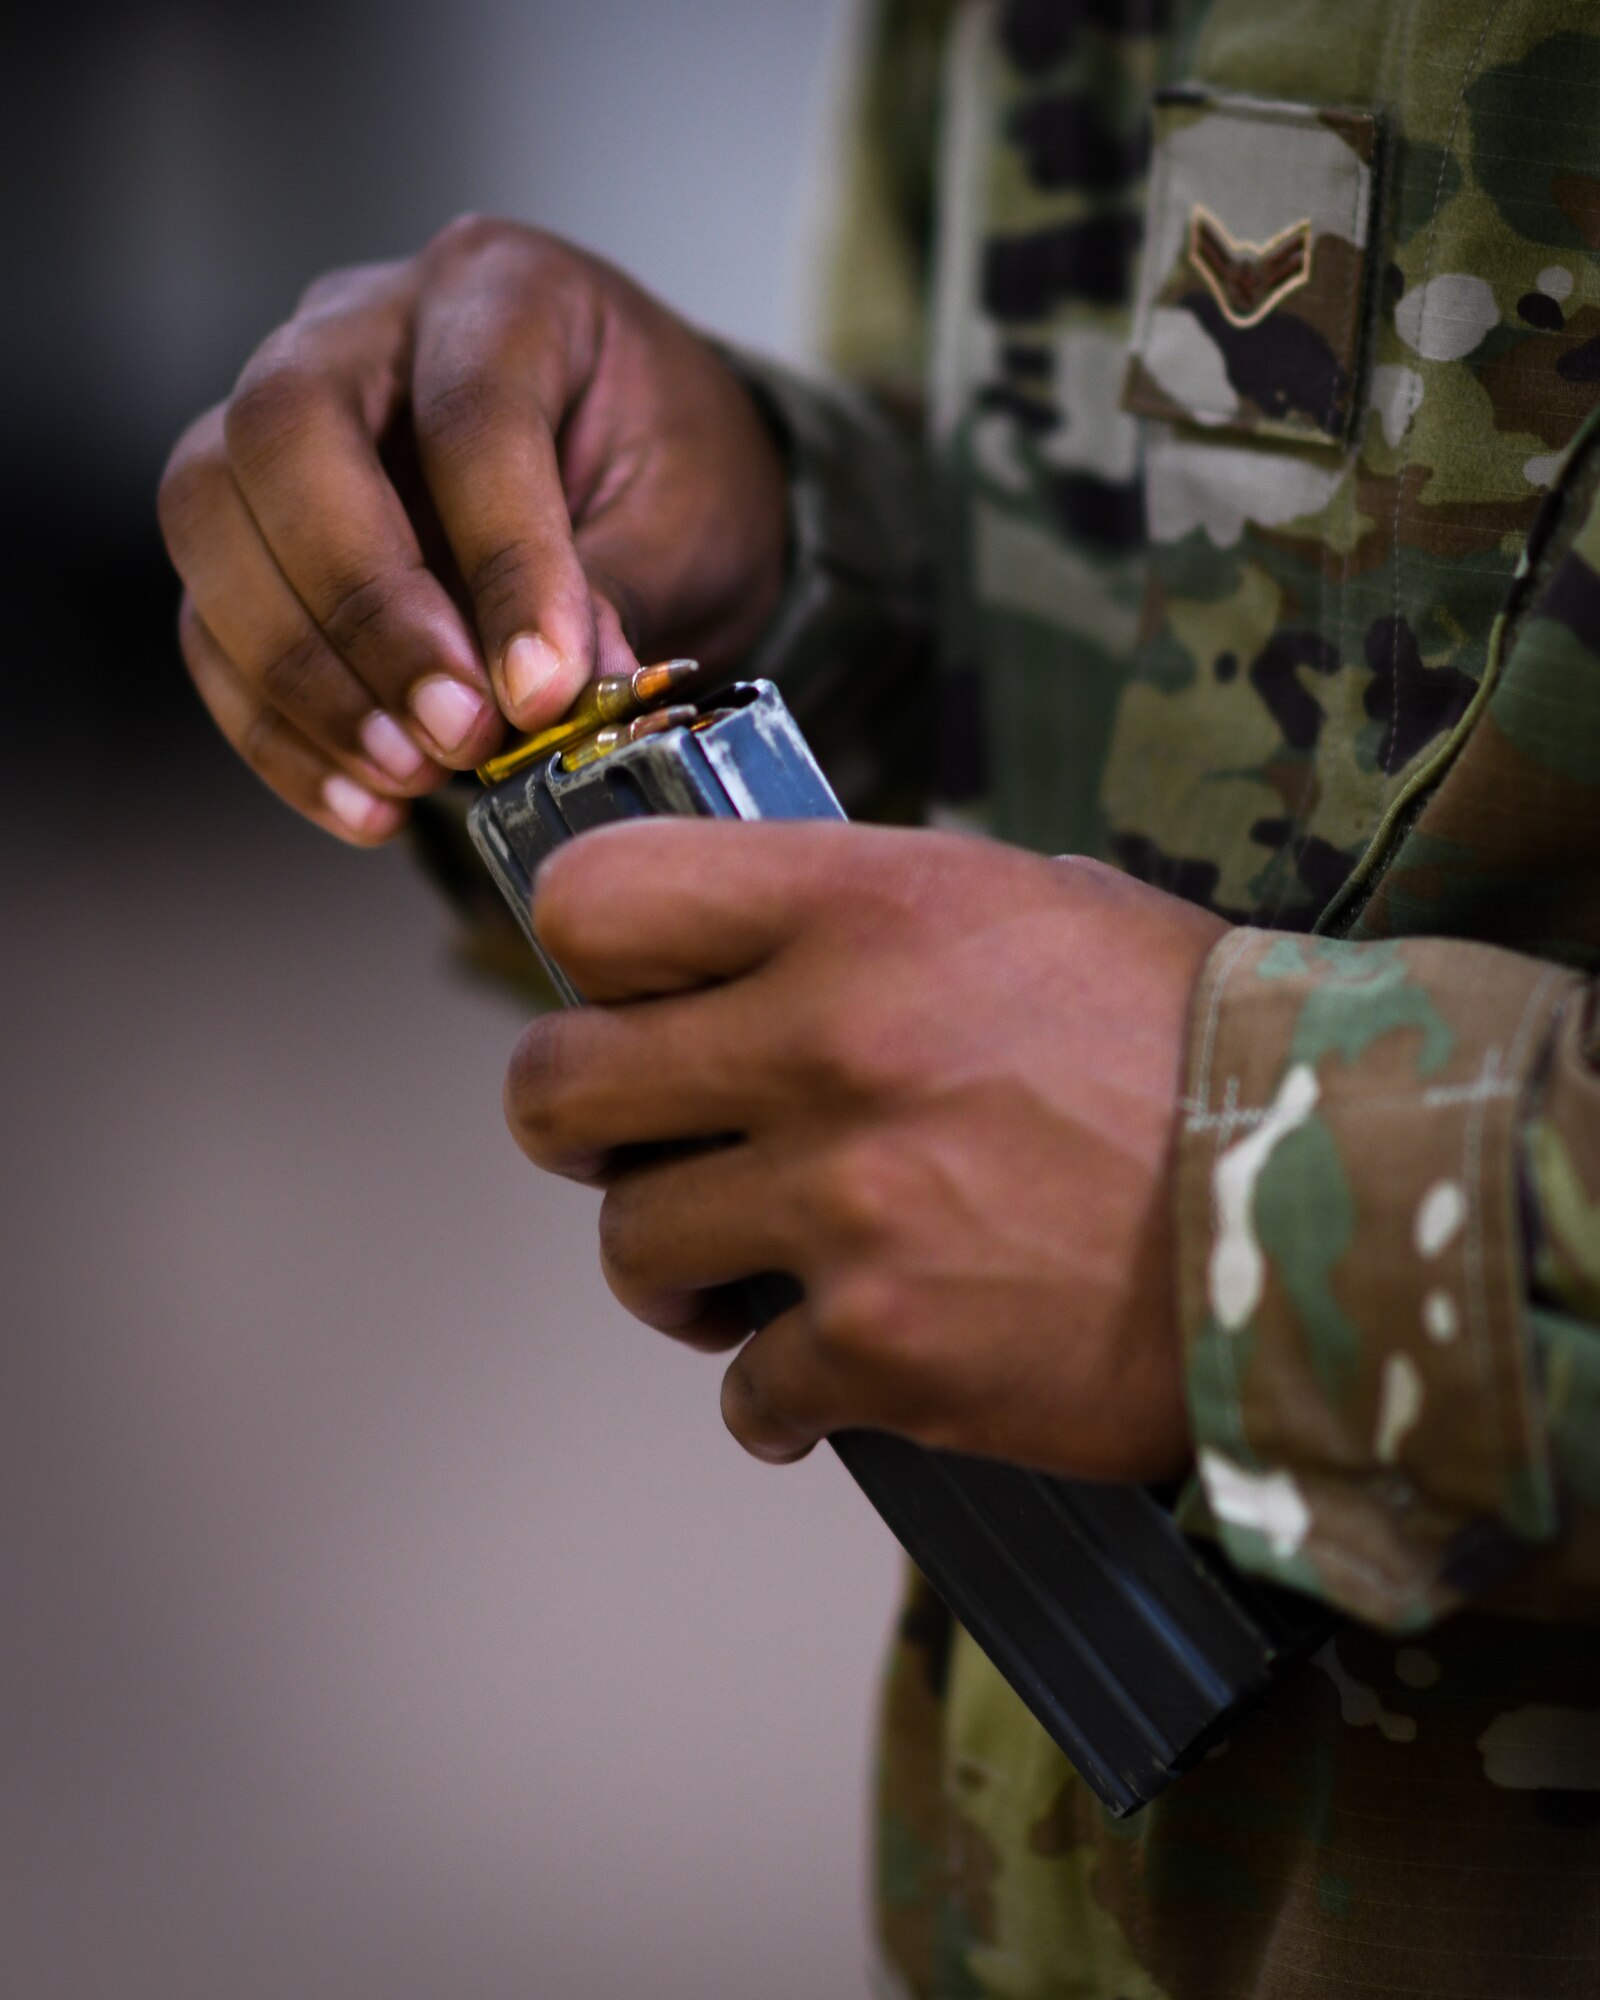 A Reserve Citizen Airman, a medical specialist with the 910th Medical Squadron, loads 5.56x45mm NATO cartridges into an M4 carbine magazine at the Combat Arms Training and Maintenance firing range, August 1, 2020, Youngstown Air Reserve Station, Ohio. Medical professionals are required to qualify in combat arms every 36 months to remain mission ready.